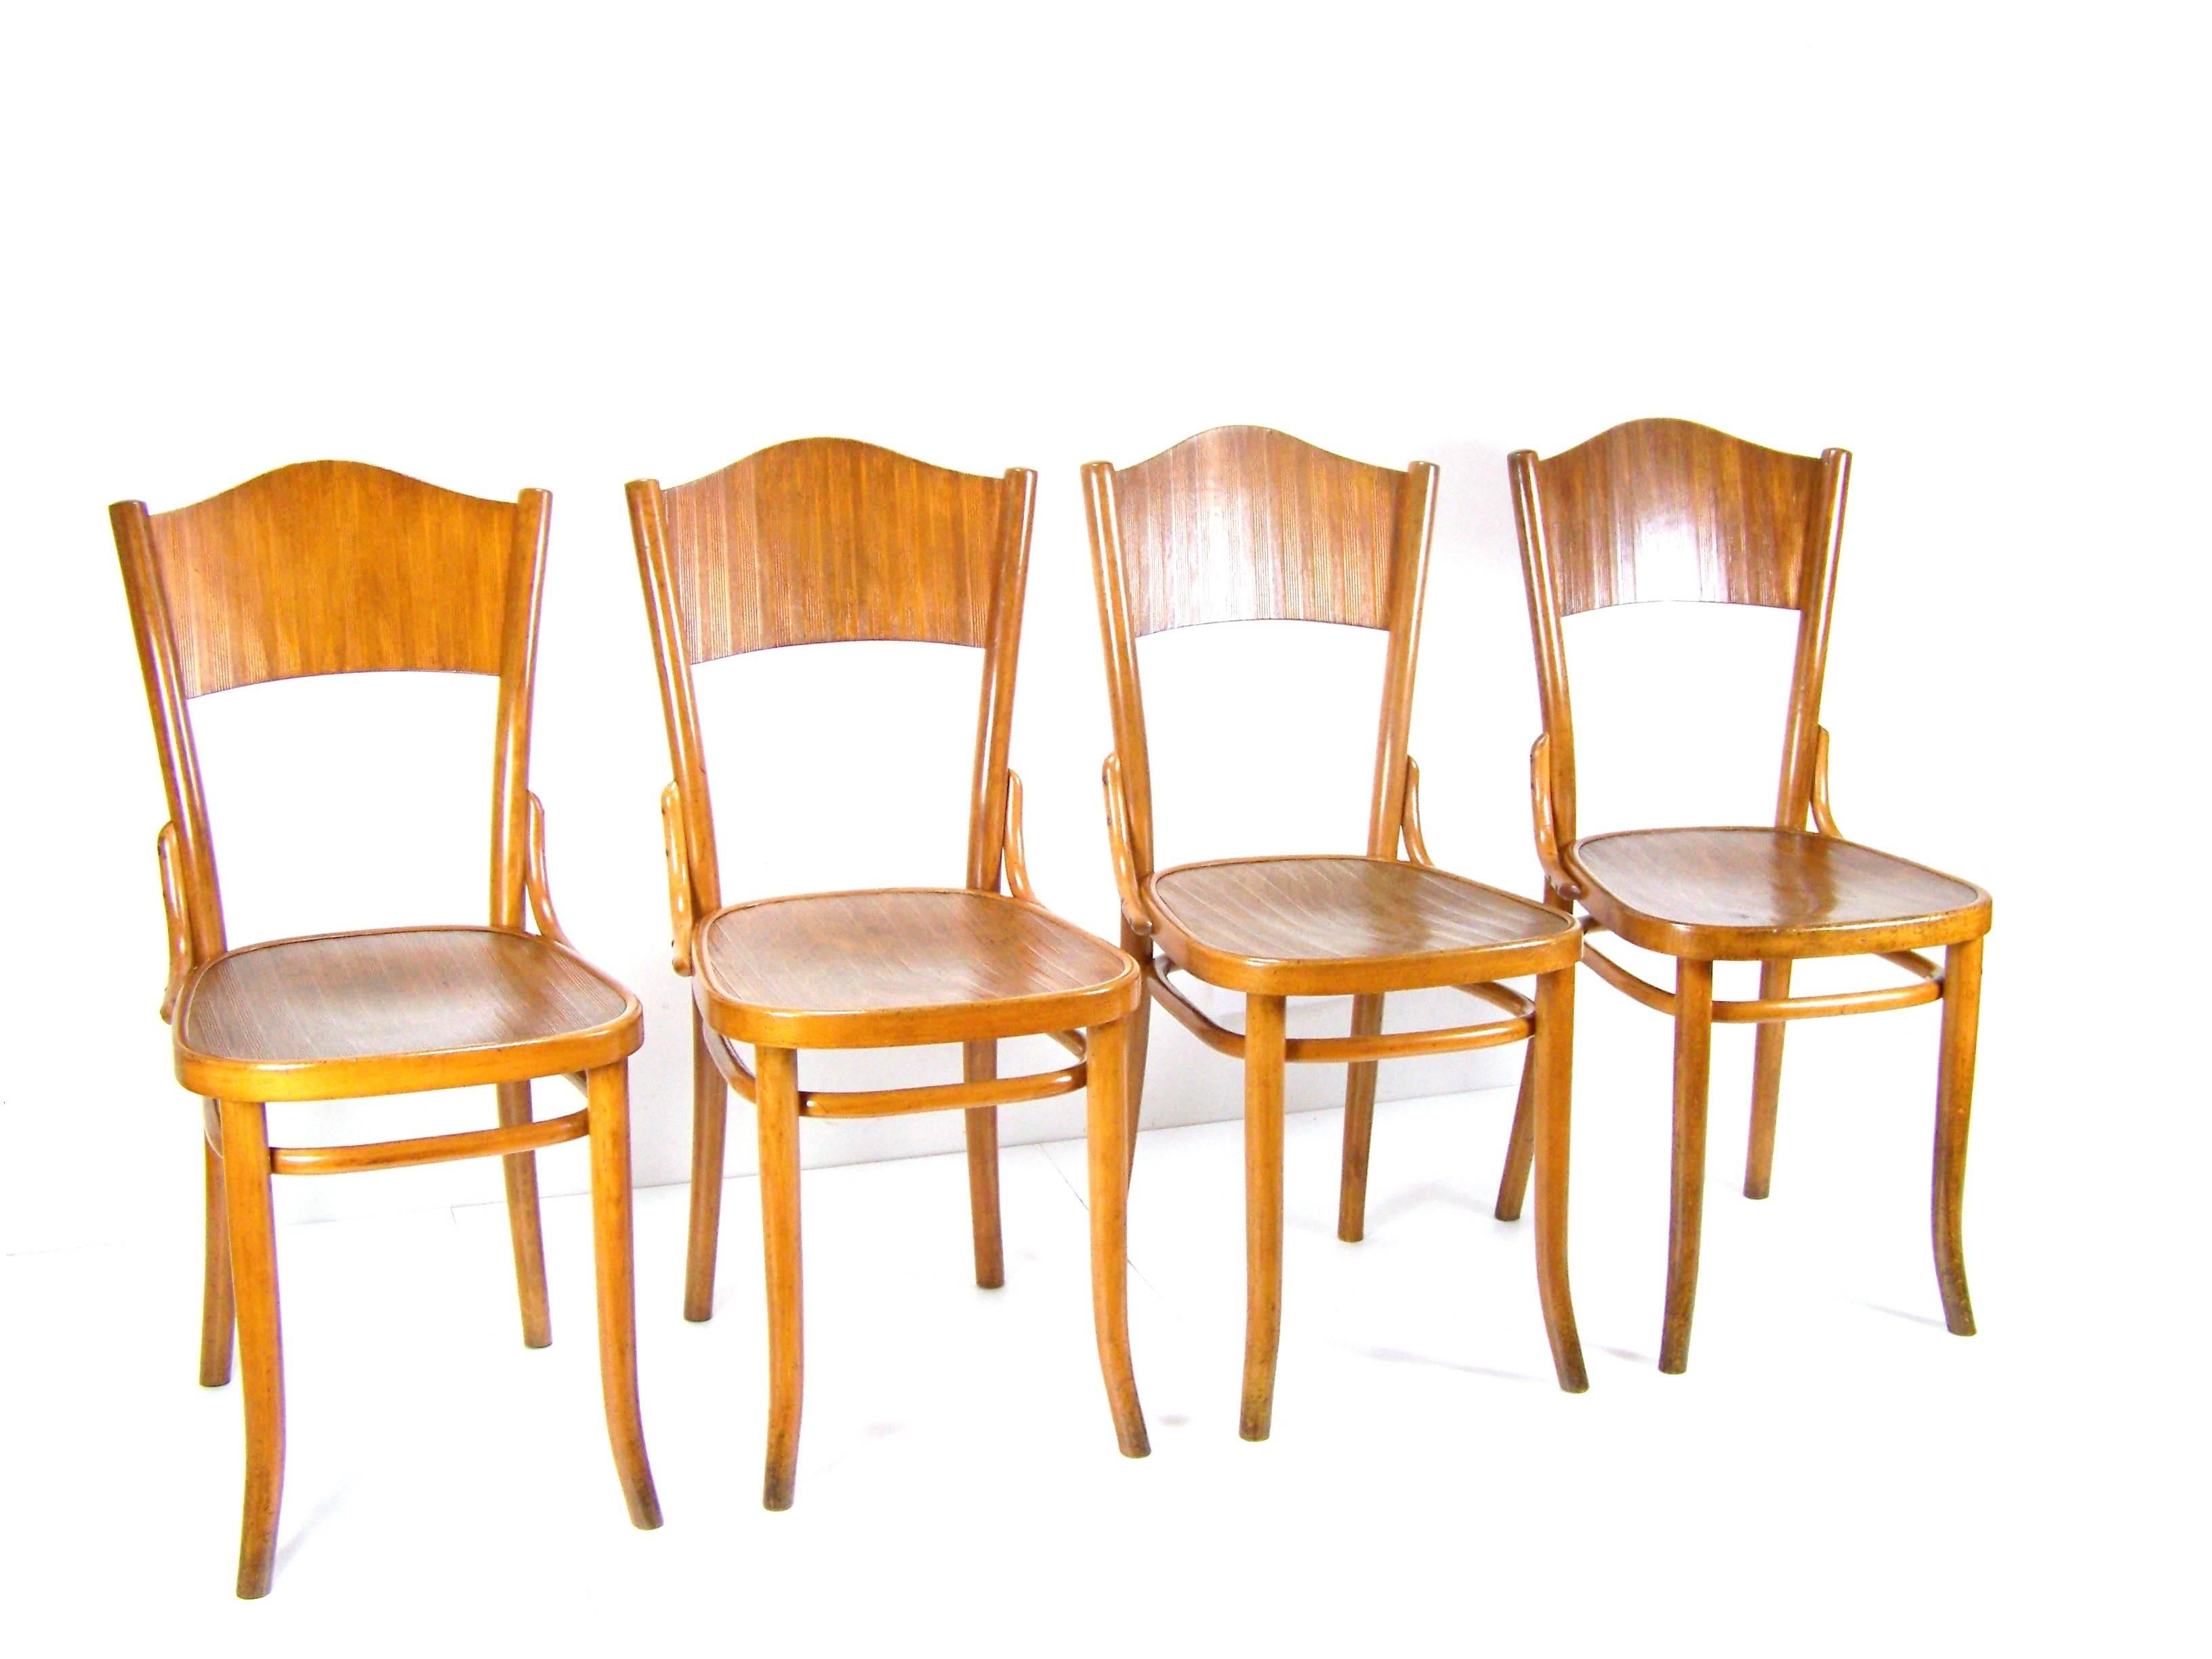 Manufactured by the Thonet company, circa 1920. Bent beechwood. Original condition with minor signs of use. Chairs was cleaned and gentle re-polished with shellac finish. Tinny traces od woodworm (already inactive). One hind leg was repaired. Seat